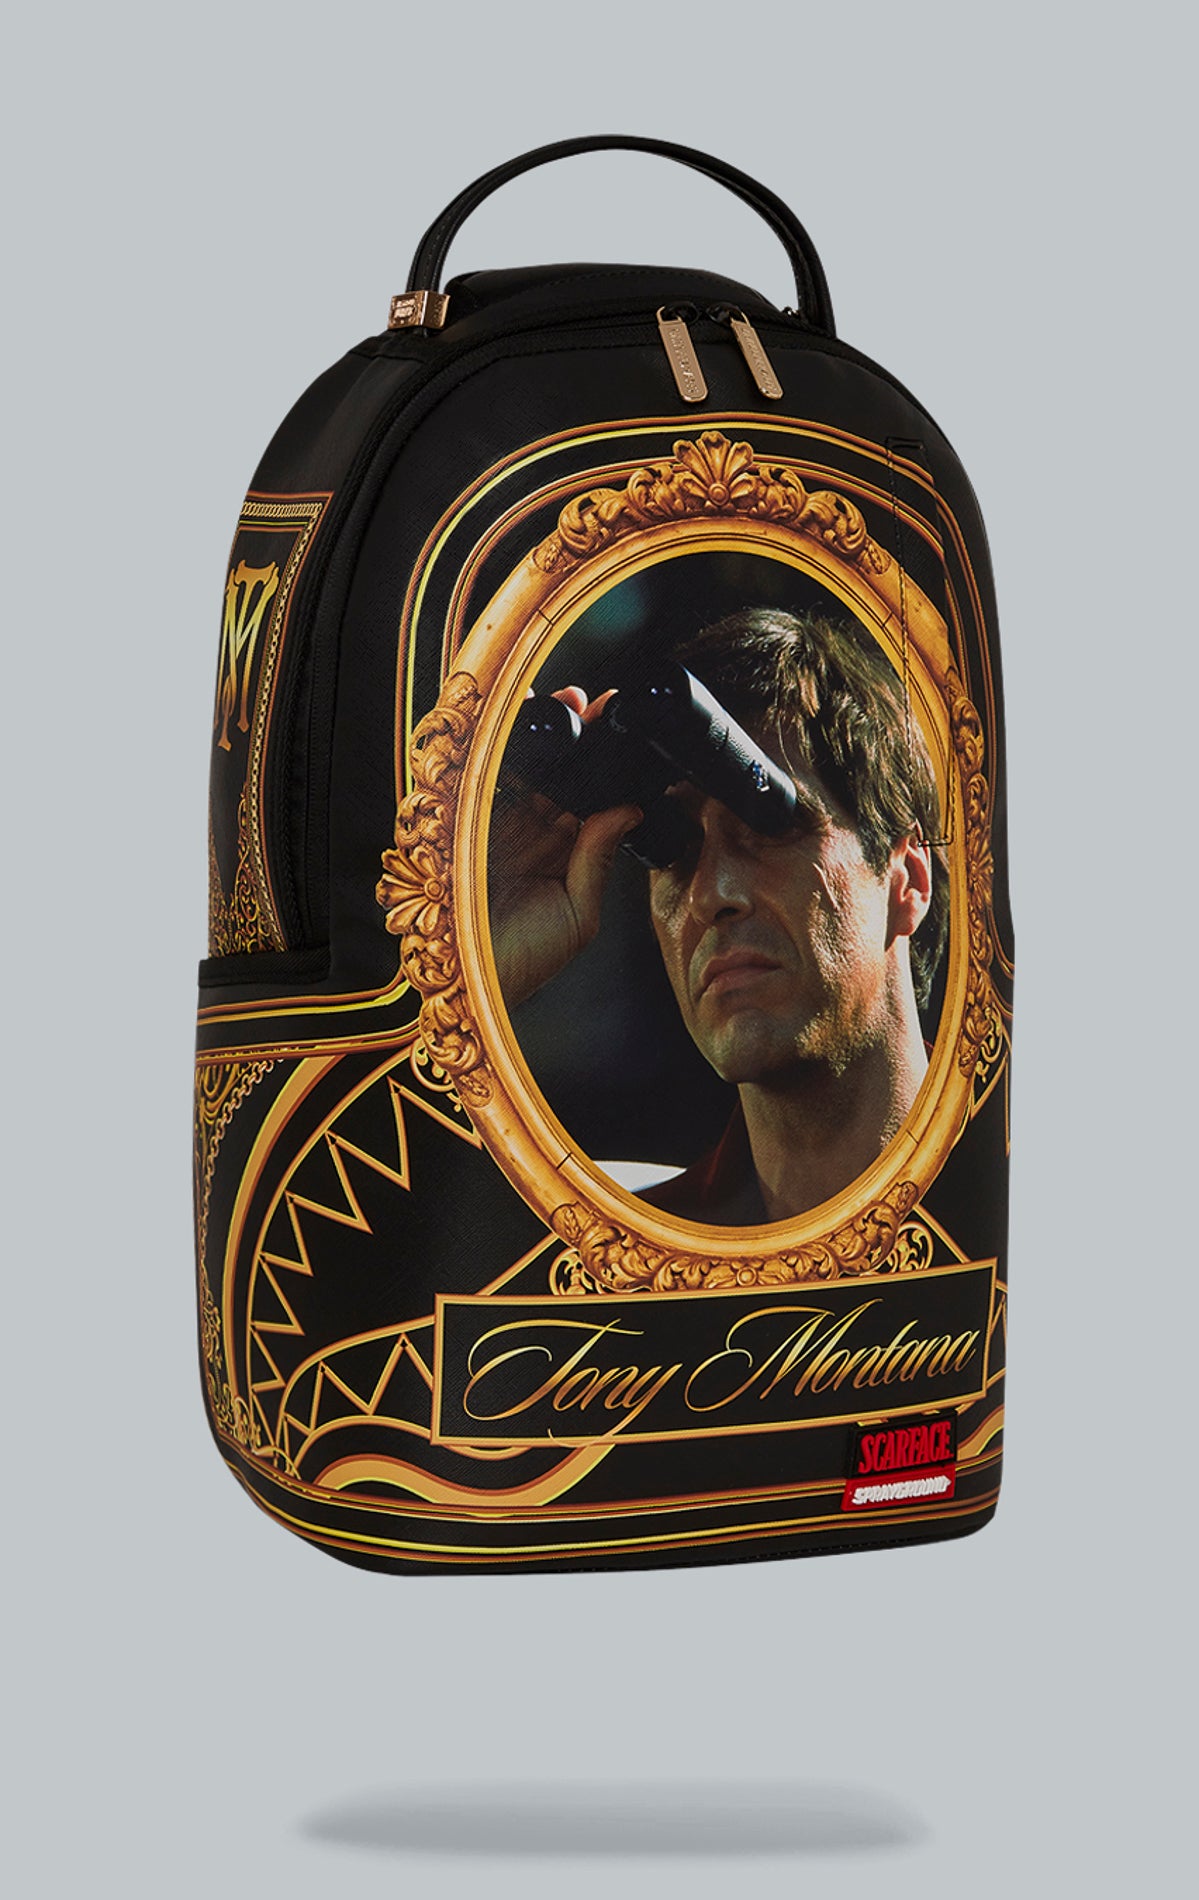 Sprayground Scarface Golden Bird Watcher Backpack. The backpack is made from durable faux leather (100% PVC) and features a Scarface-inspired design, a front zipper pocket, side pockets, a zippered stash pocket, a separate velour sunglass compartment, ergonomic mesh back padding, adjustable straps, and a slide through back sleeve that connects to carry-on luggage. The interior includes a separate velour laptop compartment and a mesh organizer pocket.